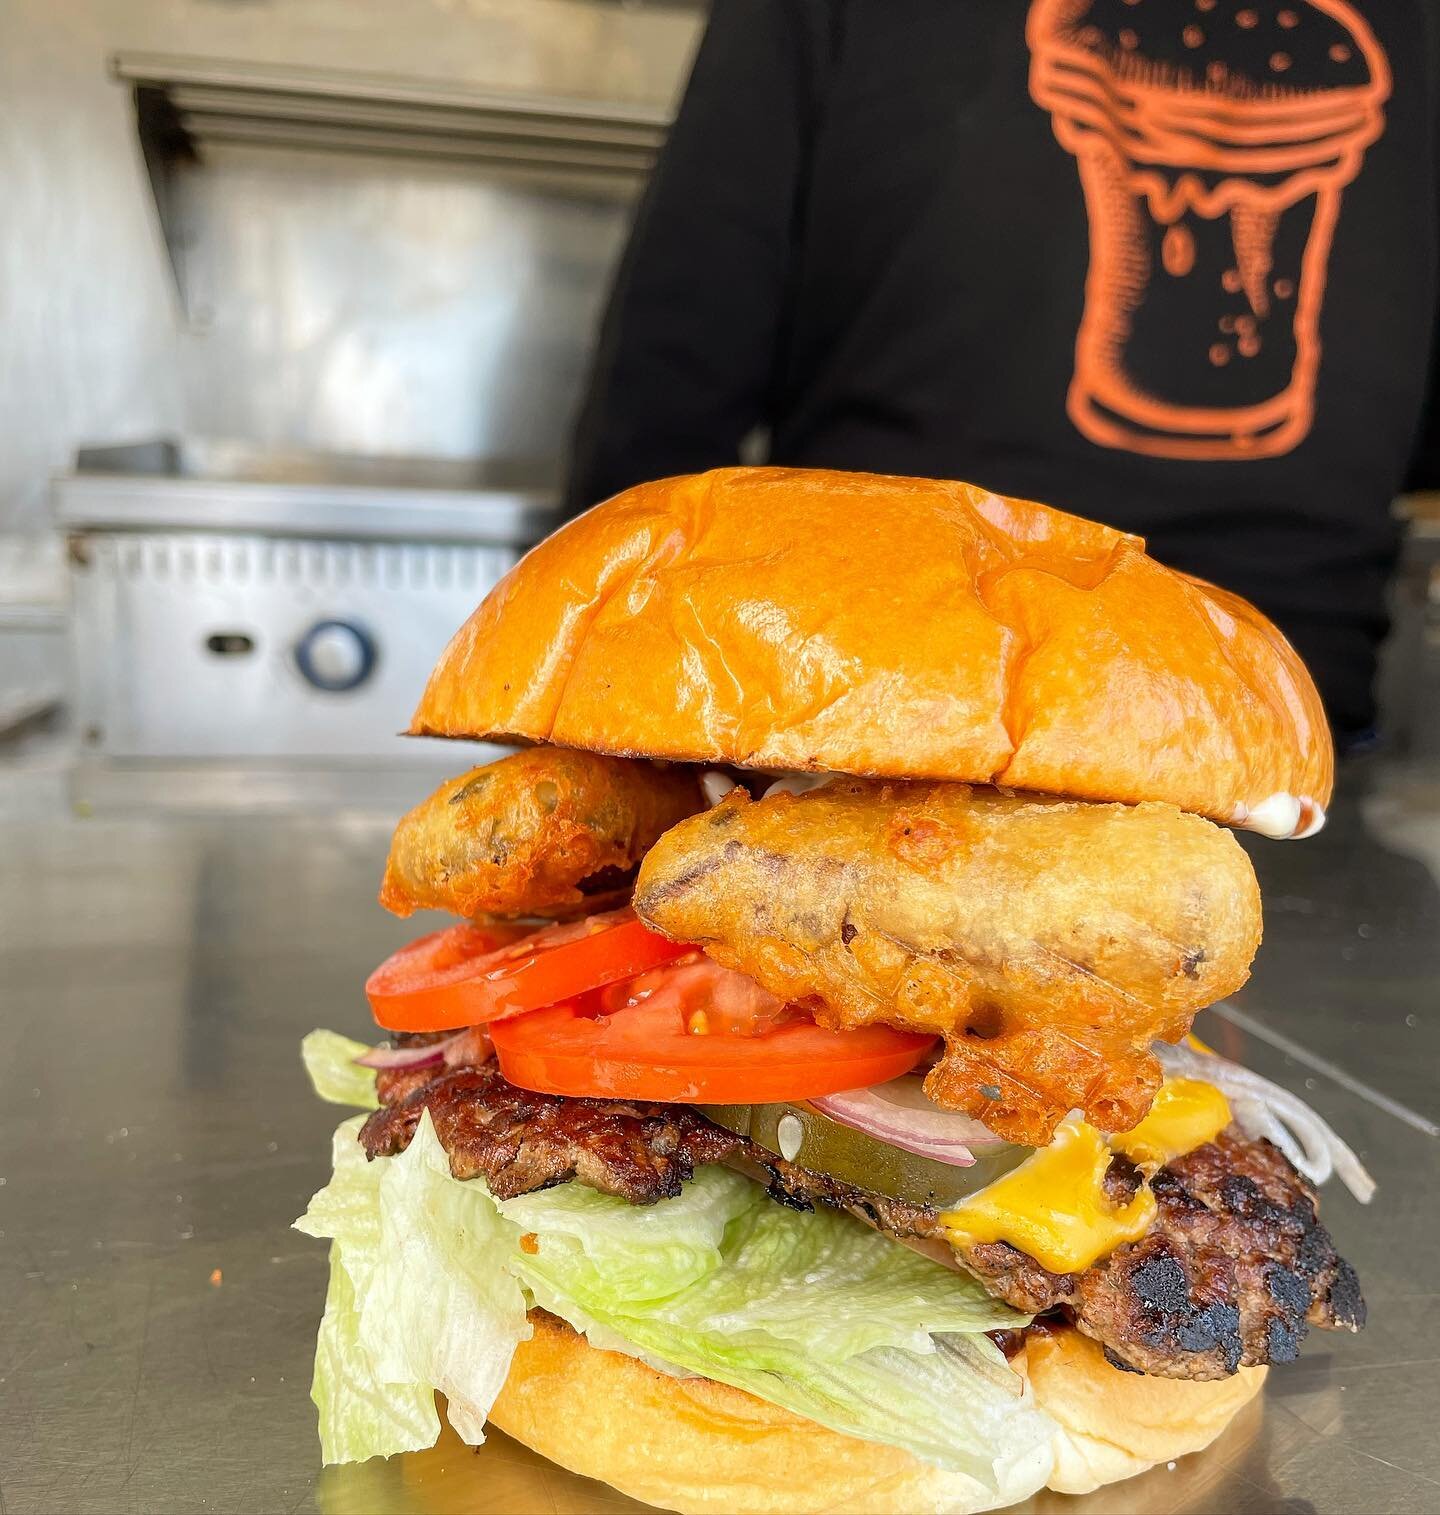 👊 Hitting this weekend hard! Come and give our steak finger burger a try! Battered and fried brisket slices and soaked in a stout beer-B-Q sauce.